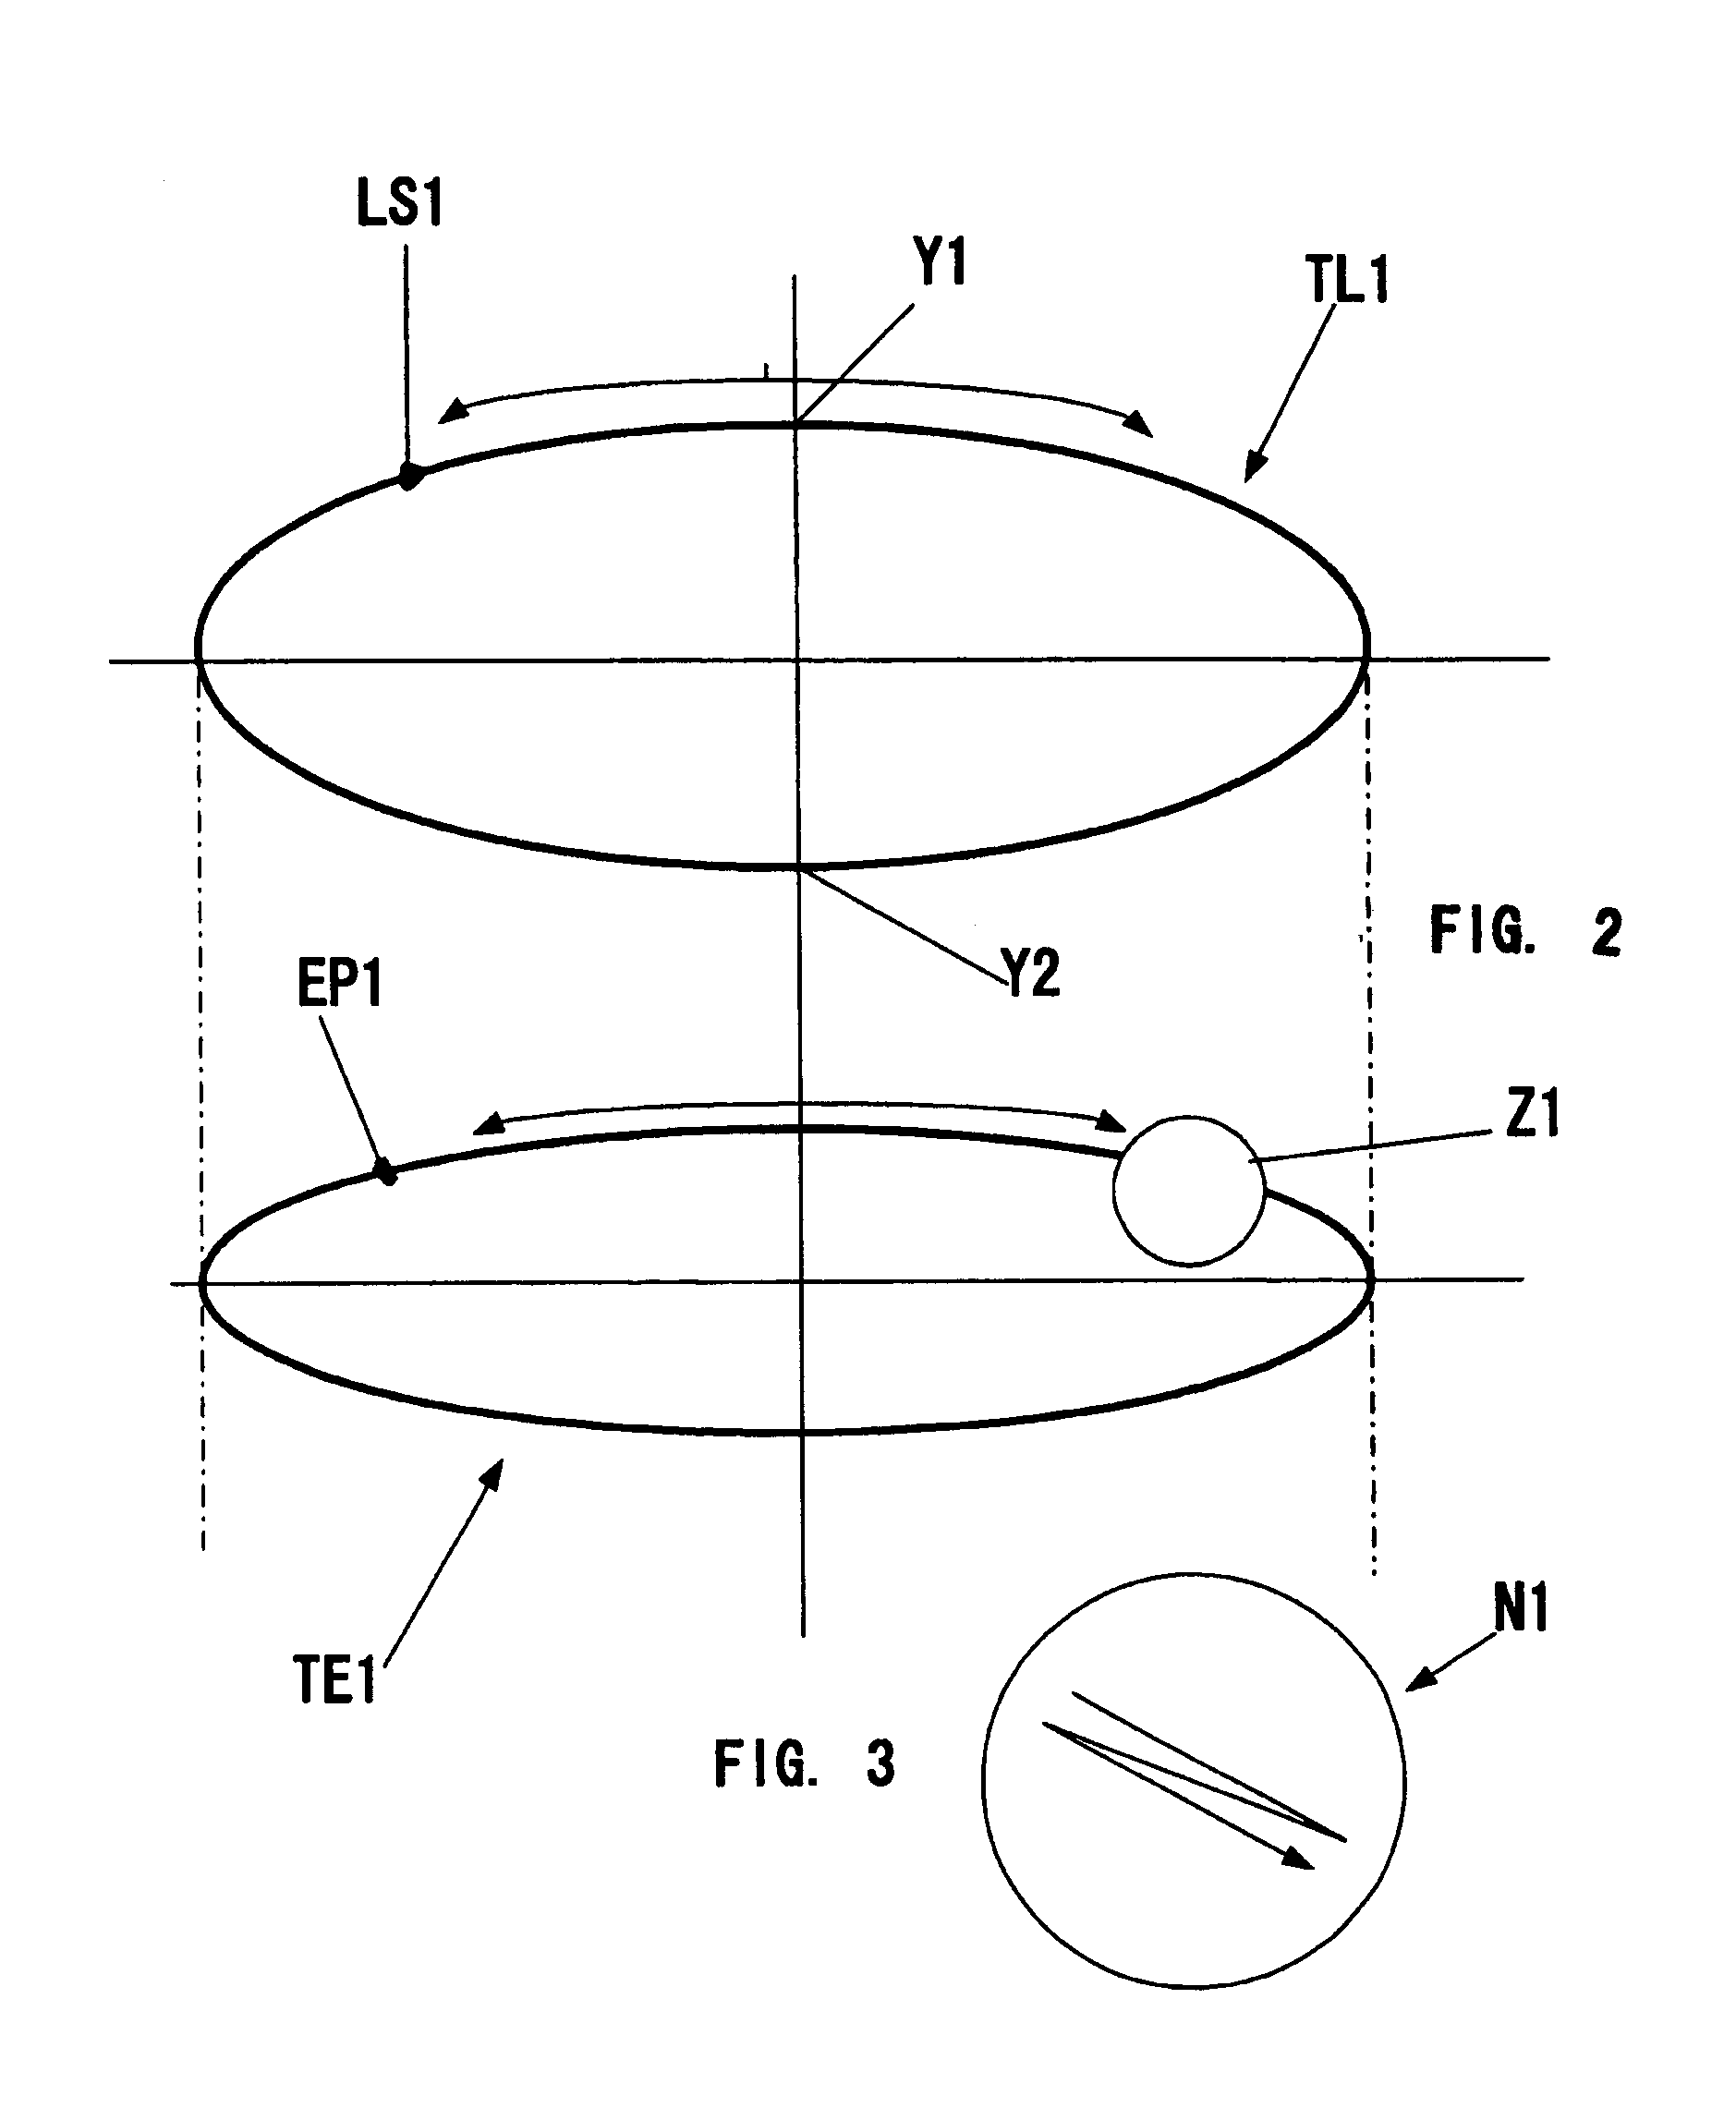 Method and apparatus for detecting abnormalities in spatial perception